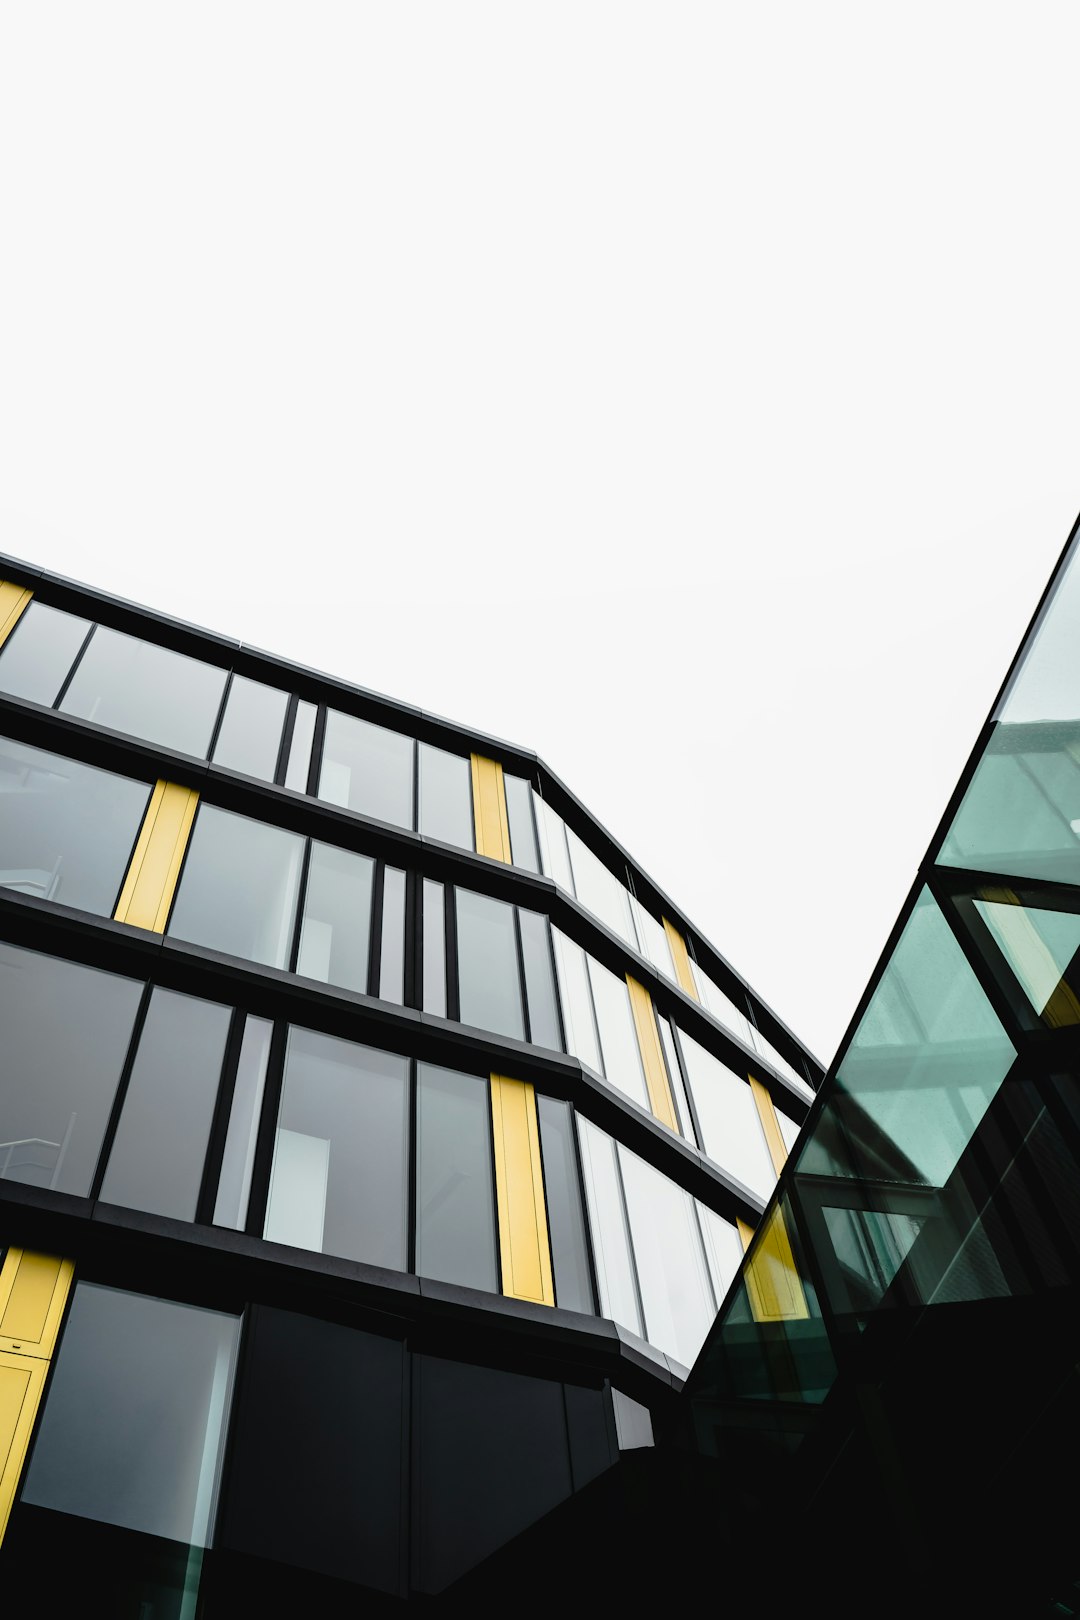 Download Black And Yellow Glass Walled Building Photo Free Banister Image On Unsplash Yellowimages Mockups